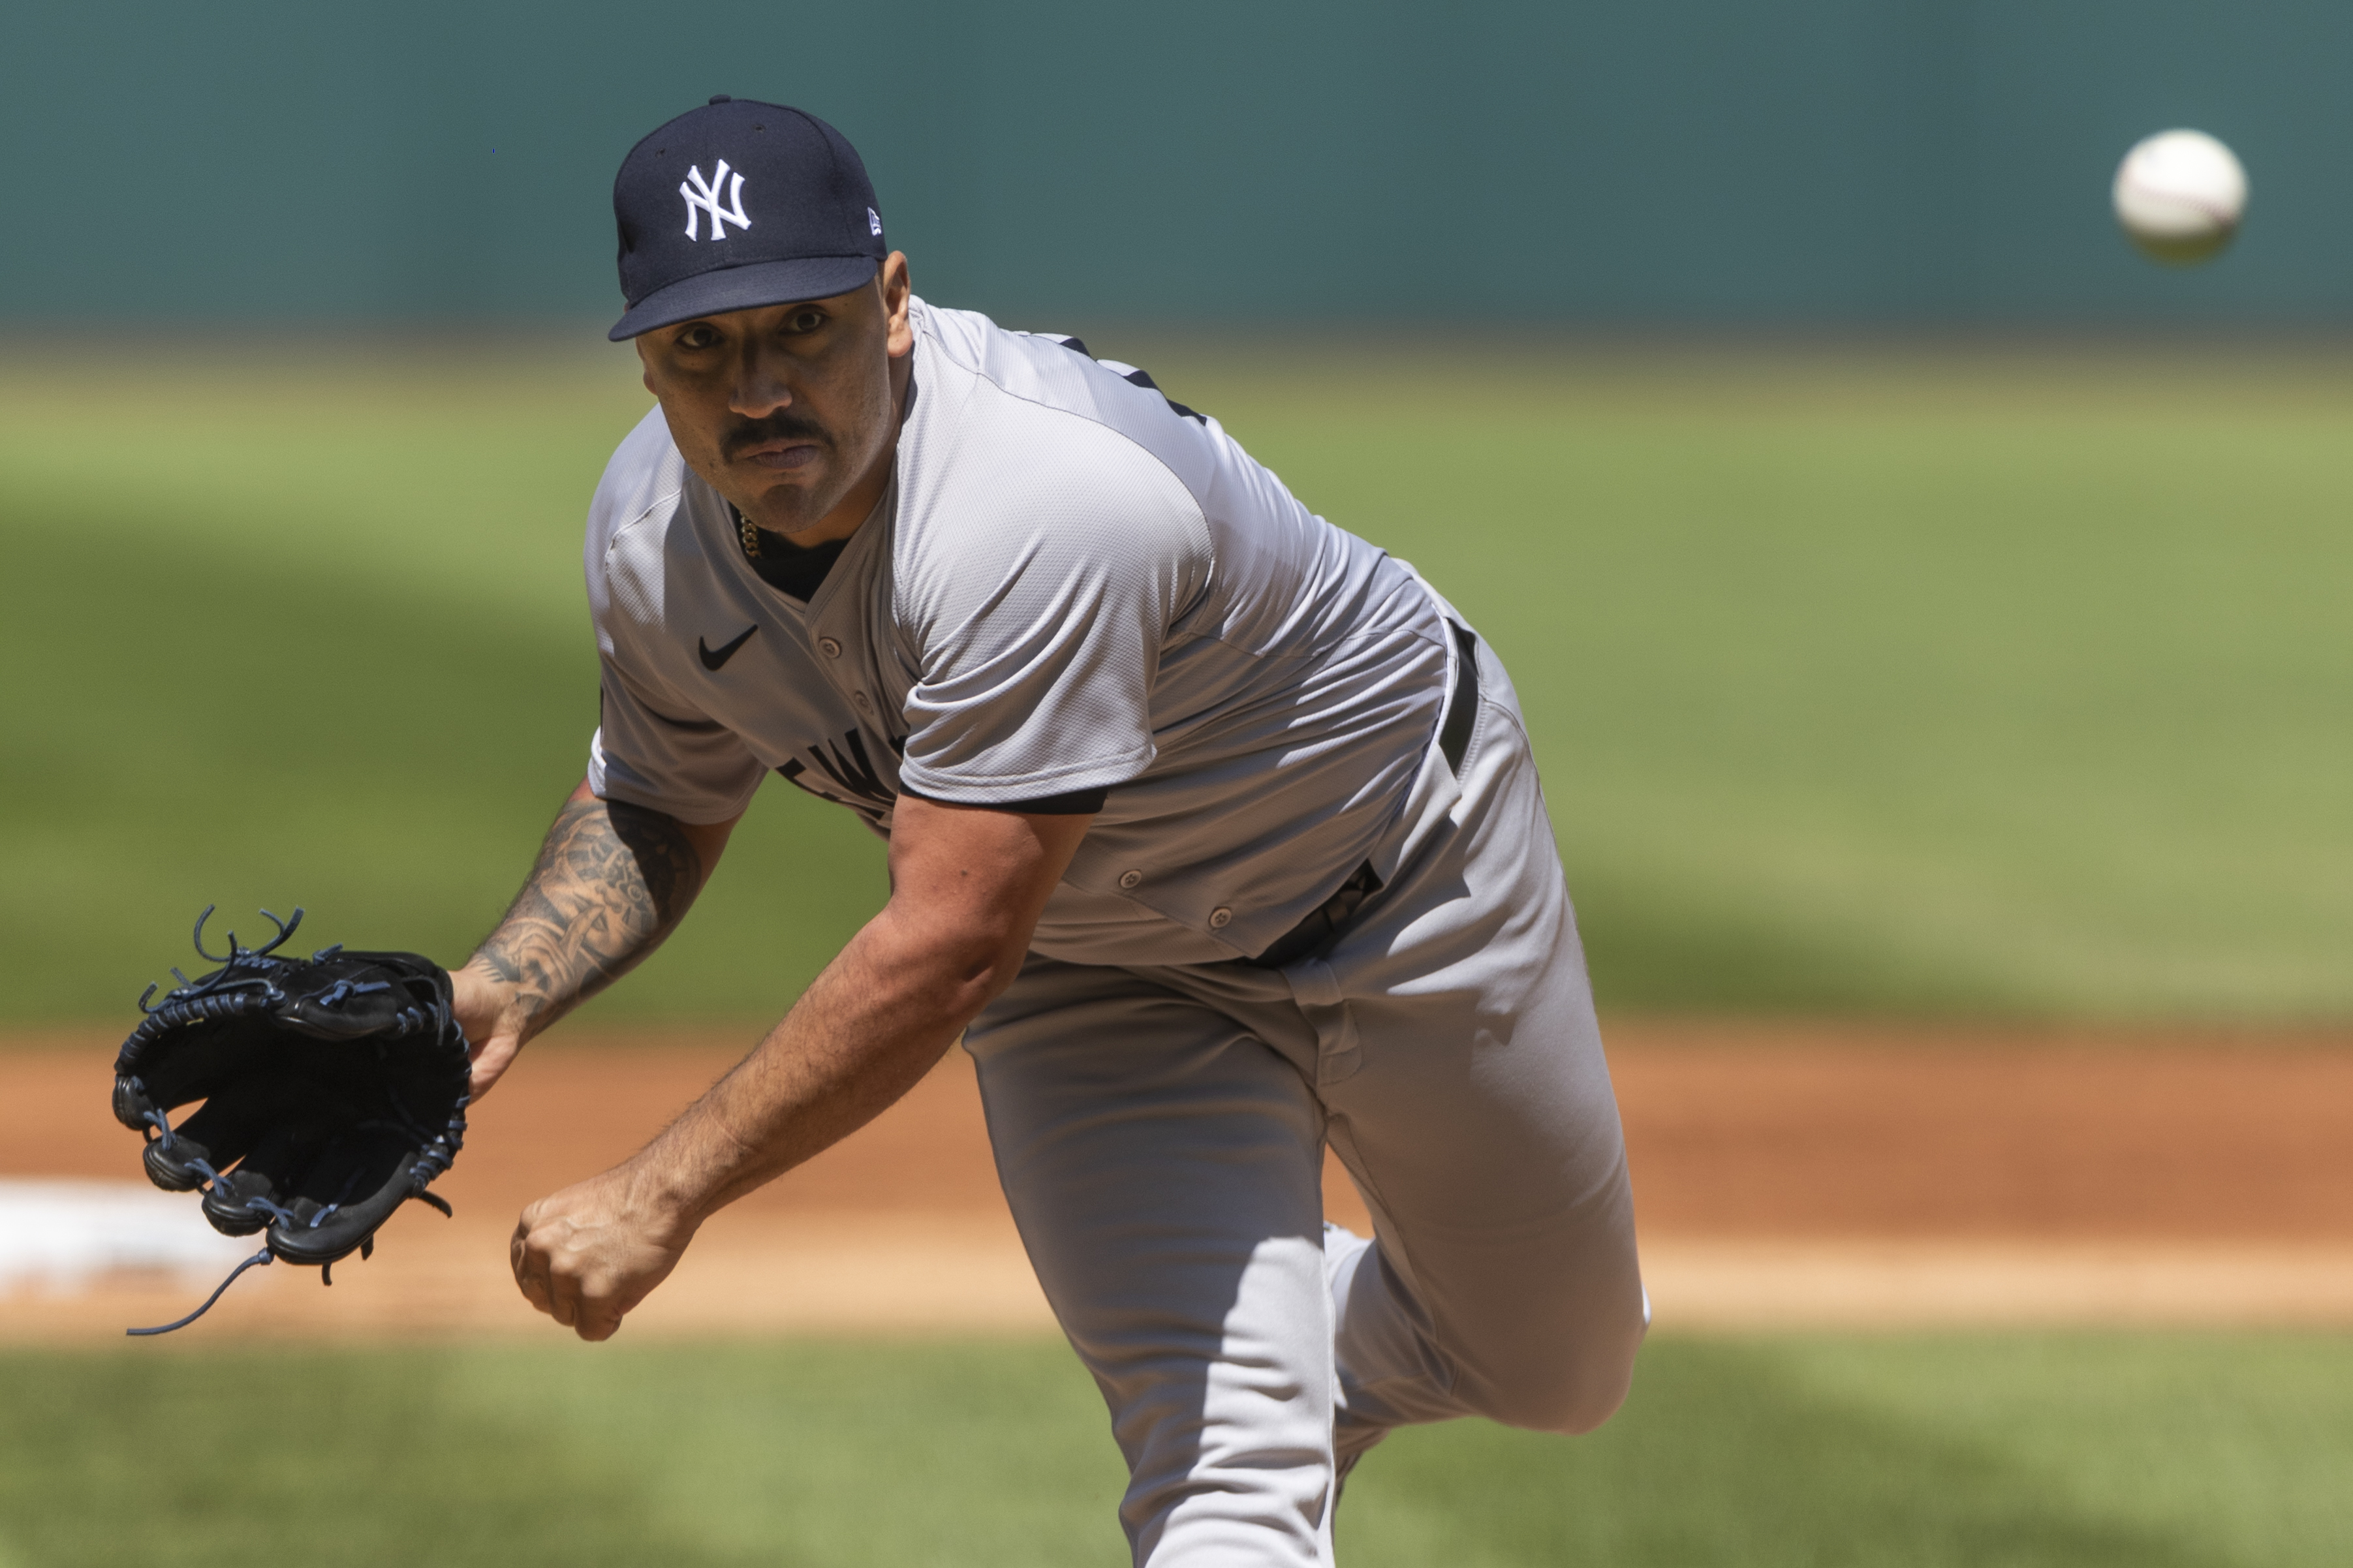 Yankees drop final game of the series to Guardians in 8-7 loss